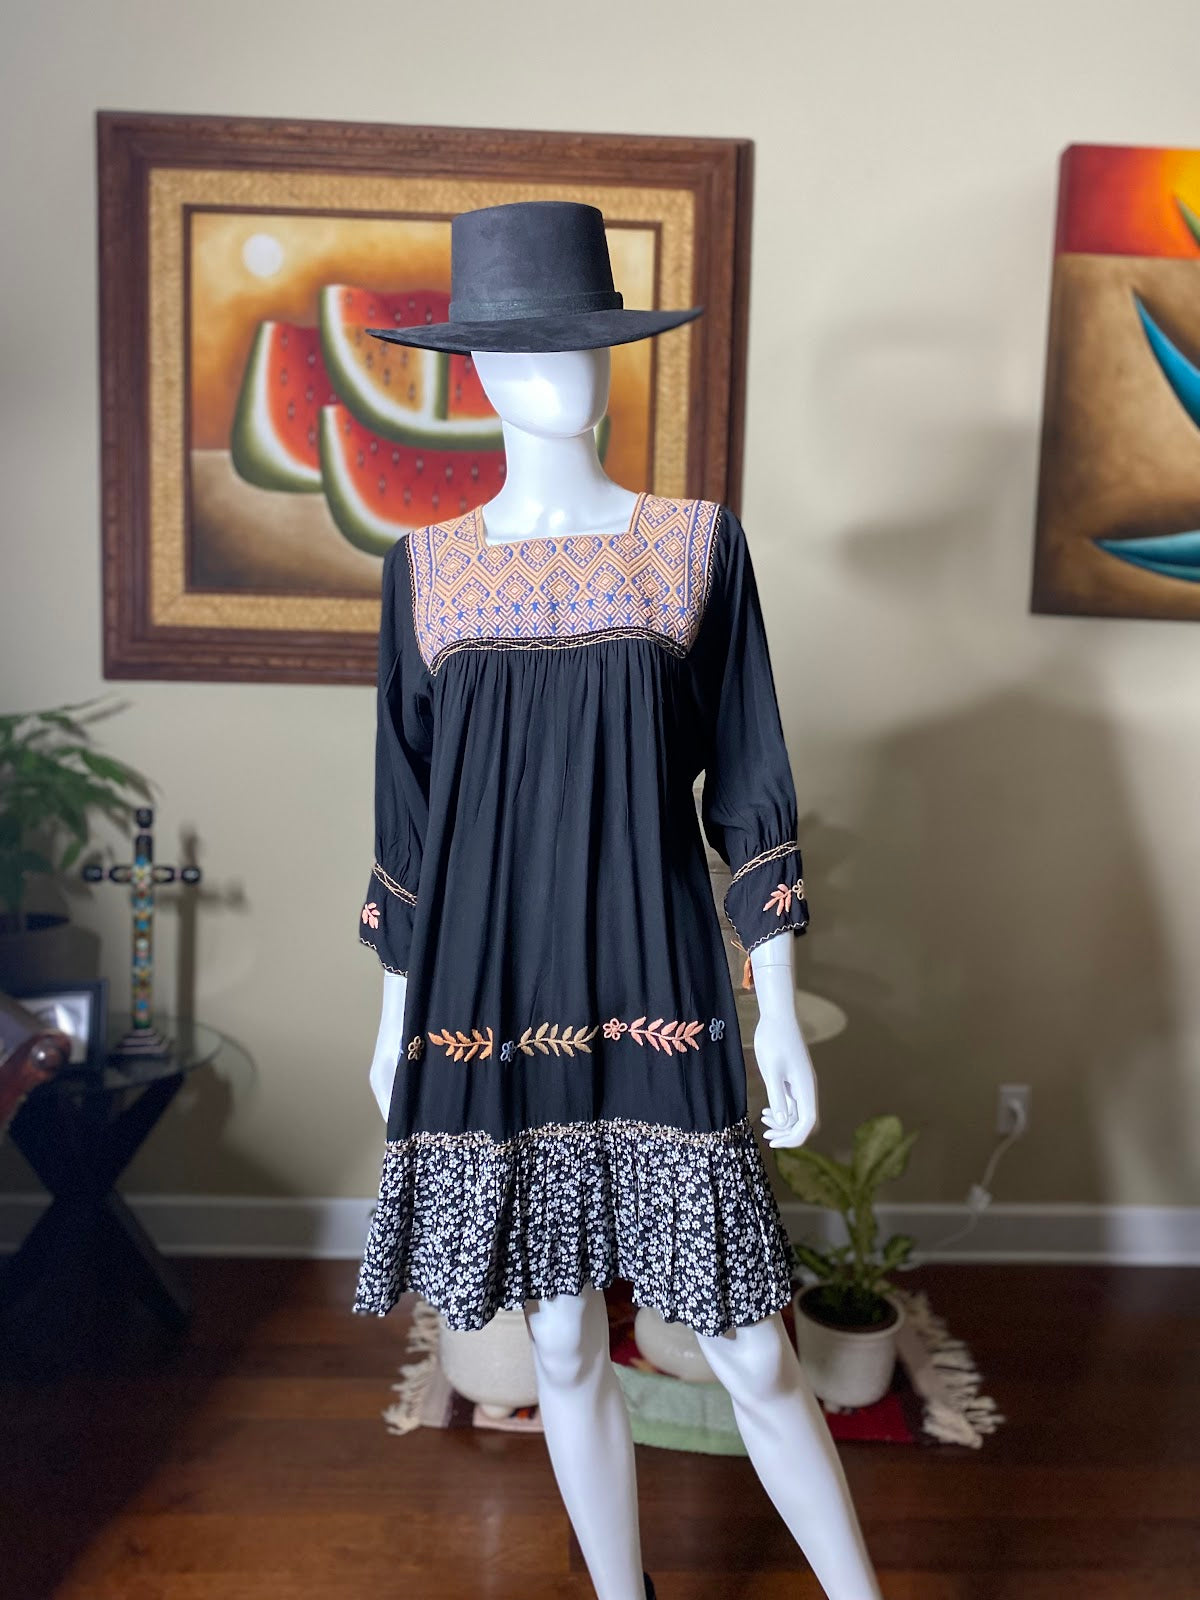 Black Hand Embroidered Dress